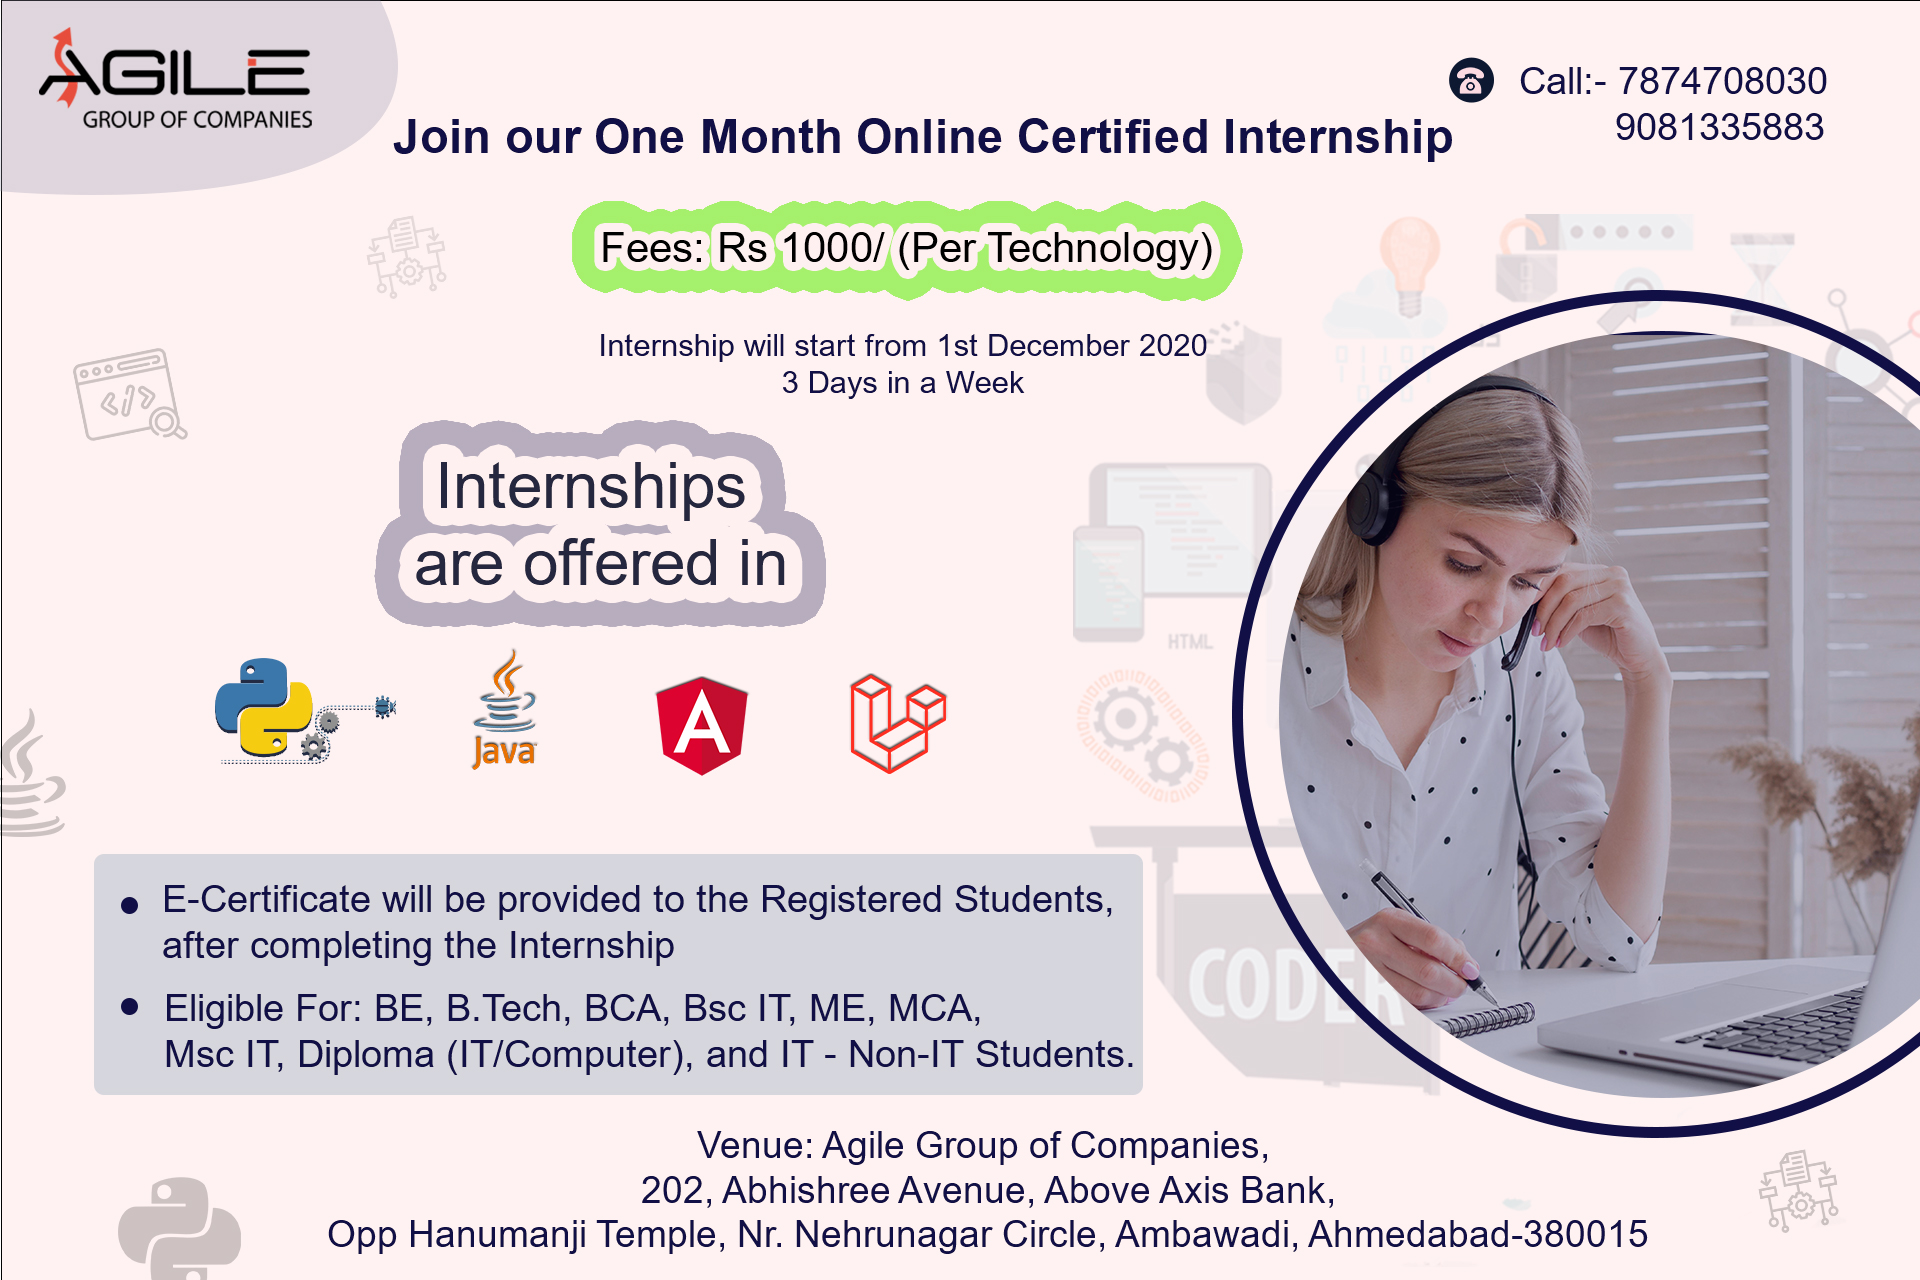 Are you looking for Certified Online Internship in IT Training Courses?, Ahmedabad, Gujarat, India